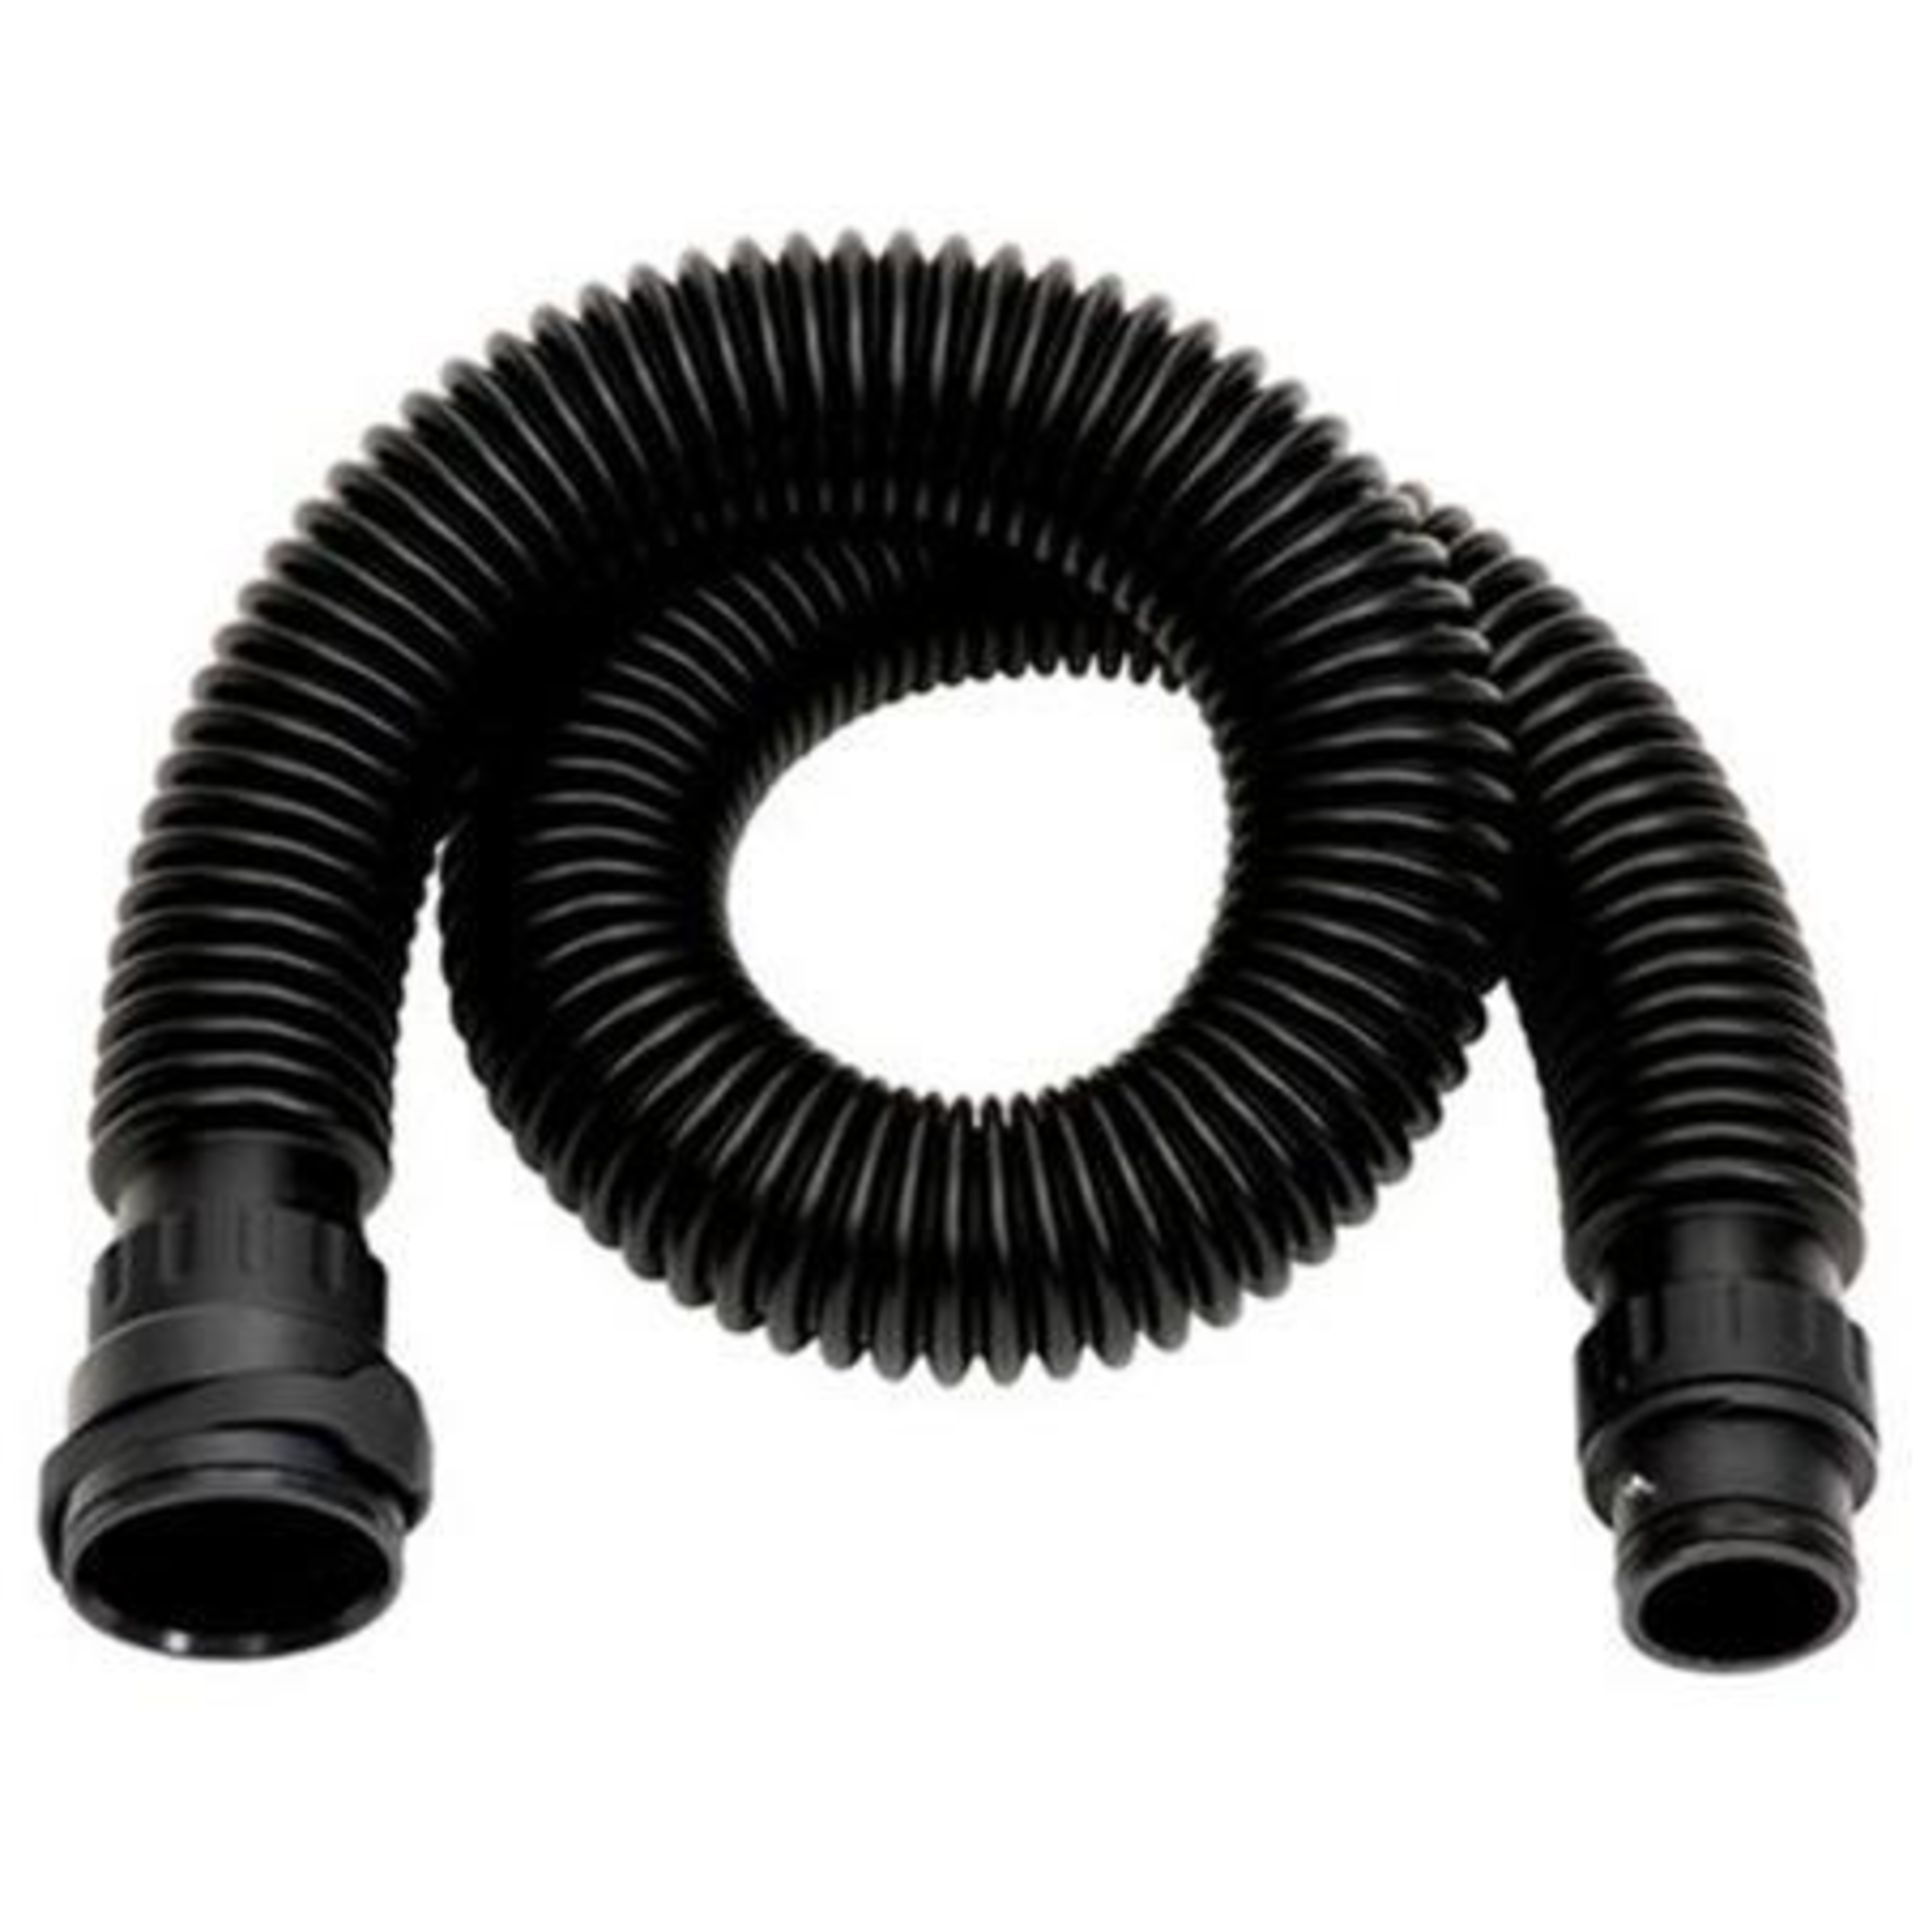 1 x 3M Speedglas Breathing Tube HD Rubber QRS 834017 - CL185 - Ref: 77247/P30 - New Stock -